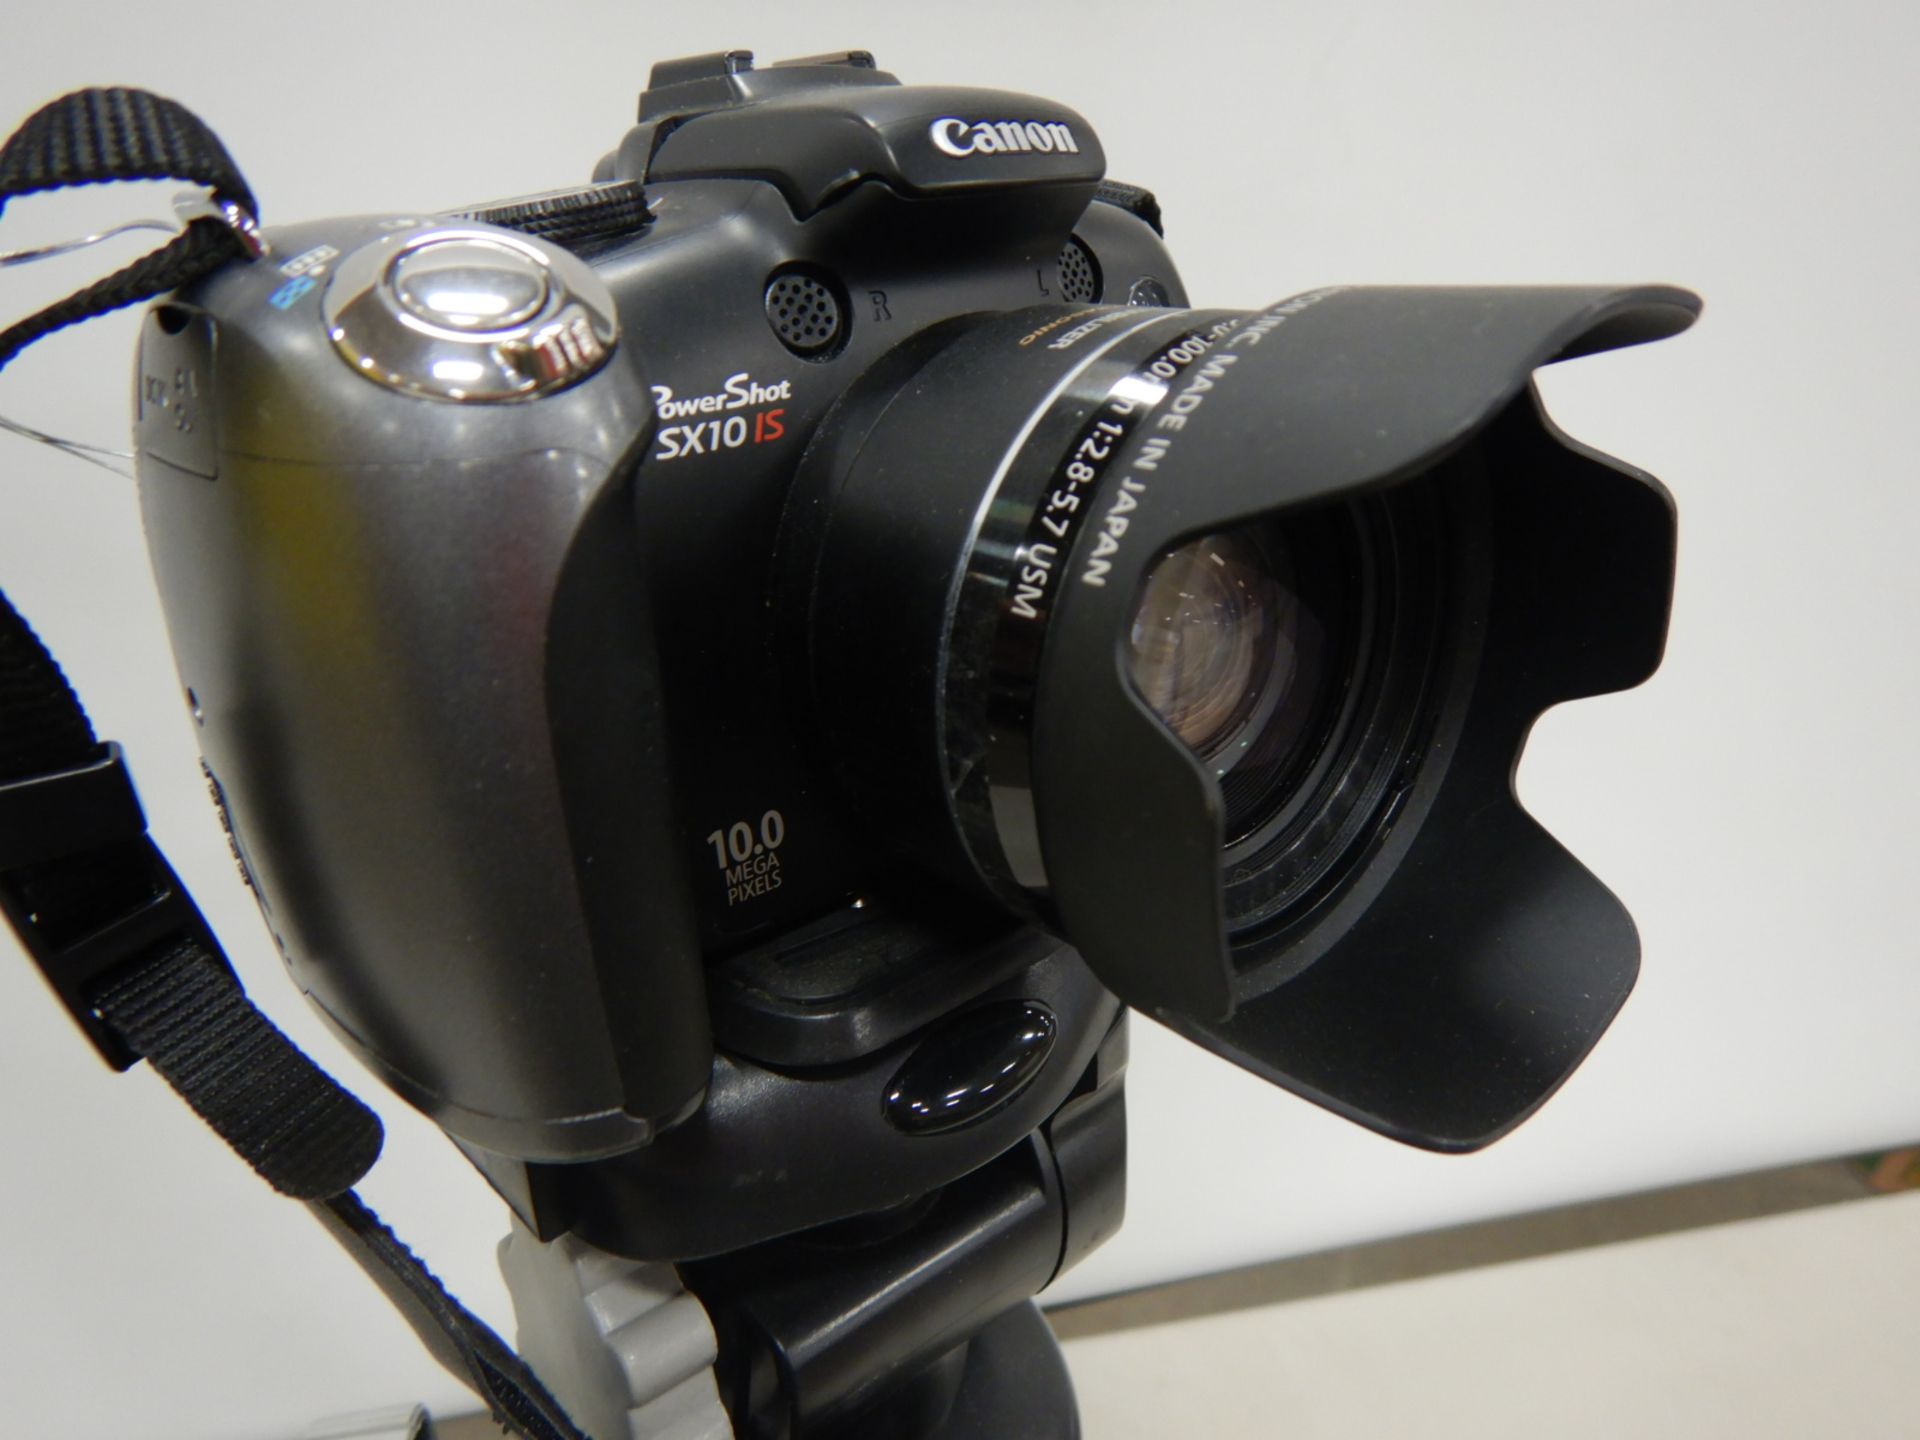 CANON POWERSHOT SX10IS DIGITAL CAMERA AND TRIPOD - Image 2 of 3